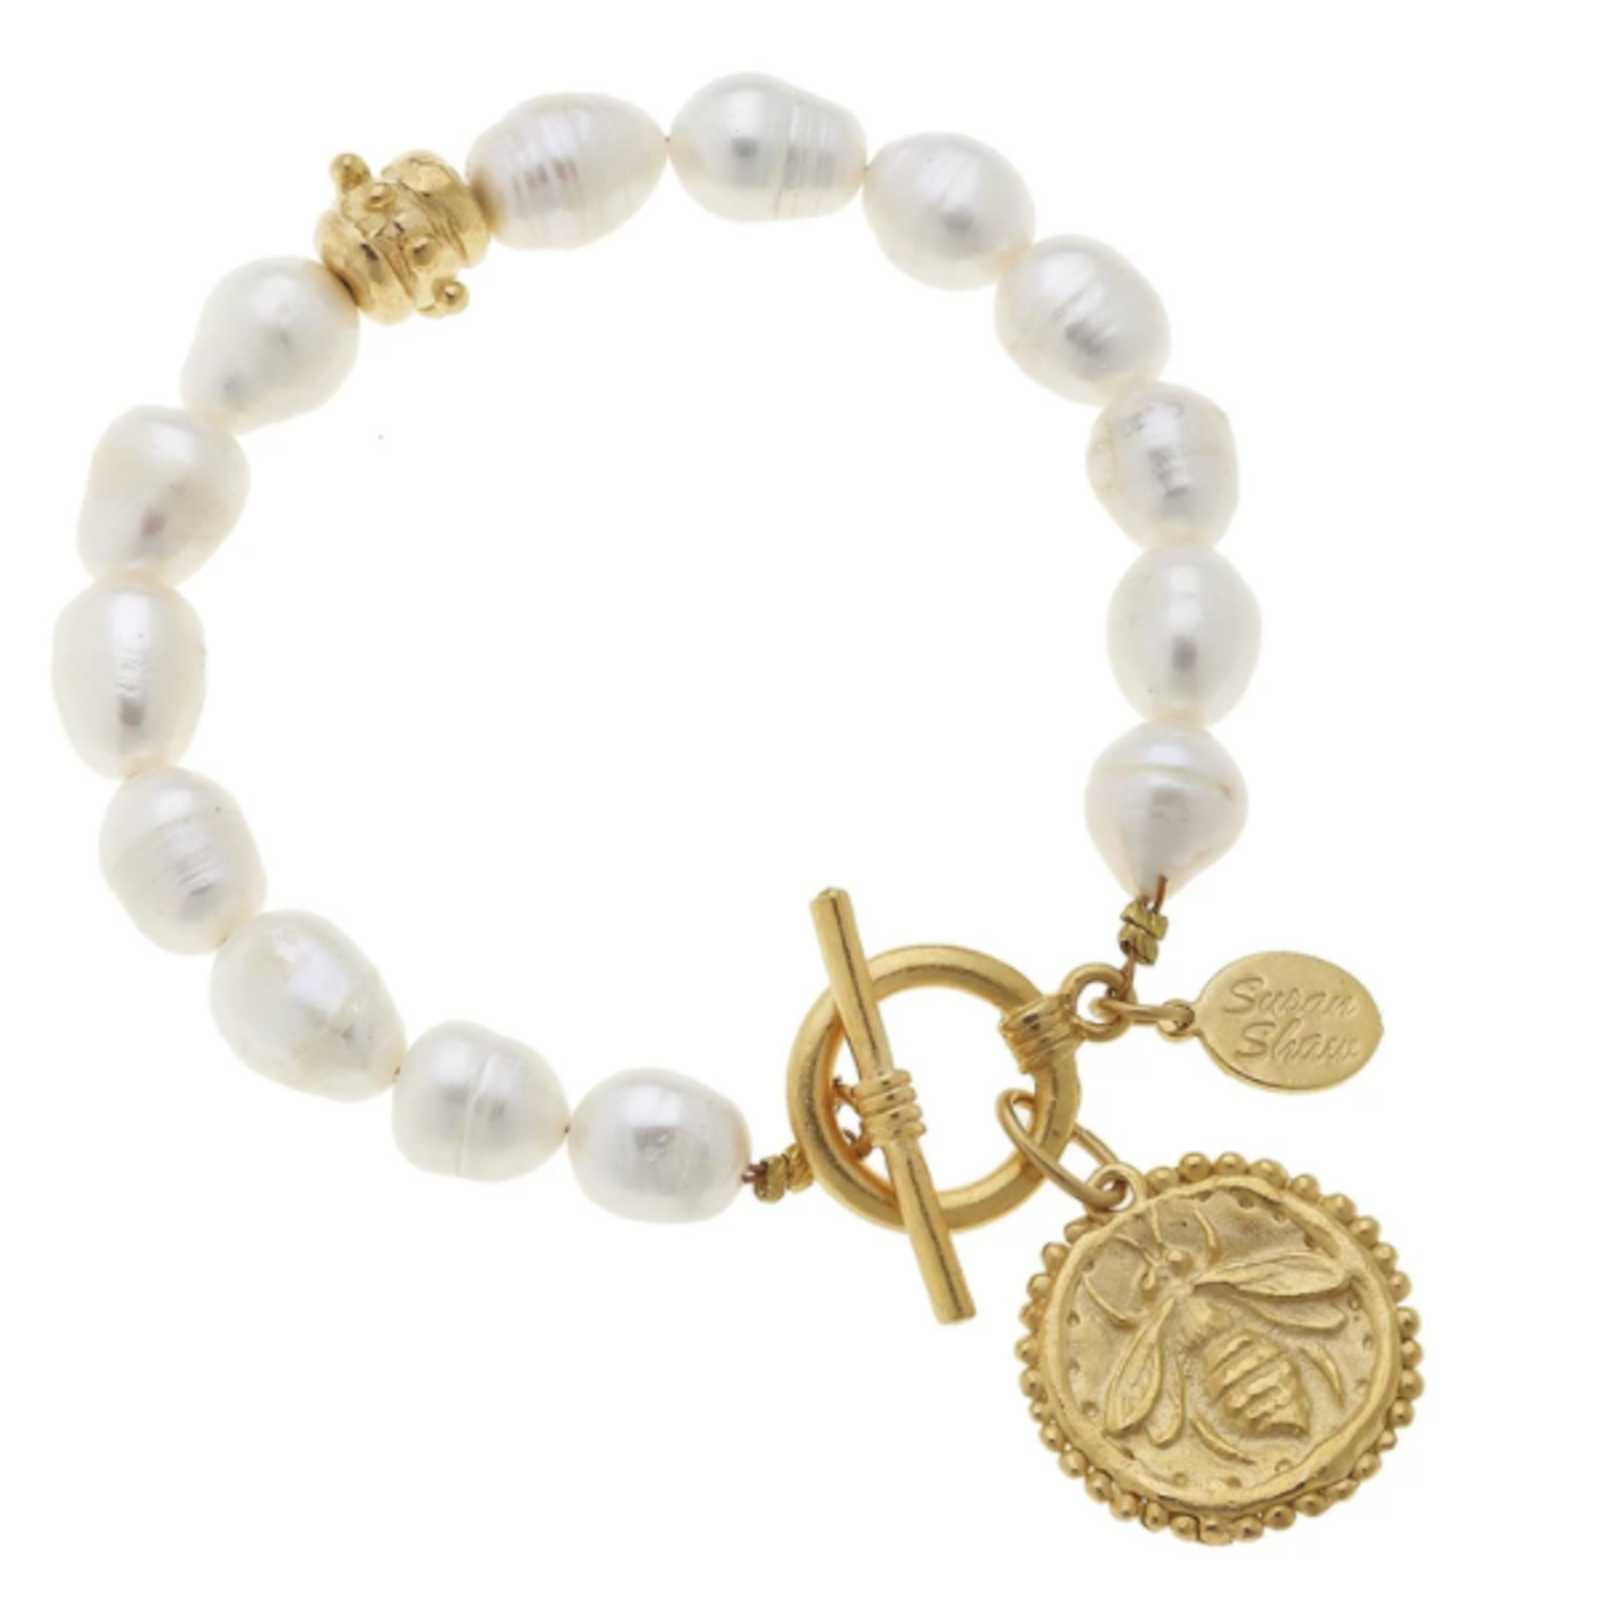 Susan Shaw Gold Bee on Genuine Freshwater Pearl Bracelet  2334rb loading=